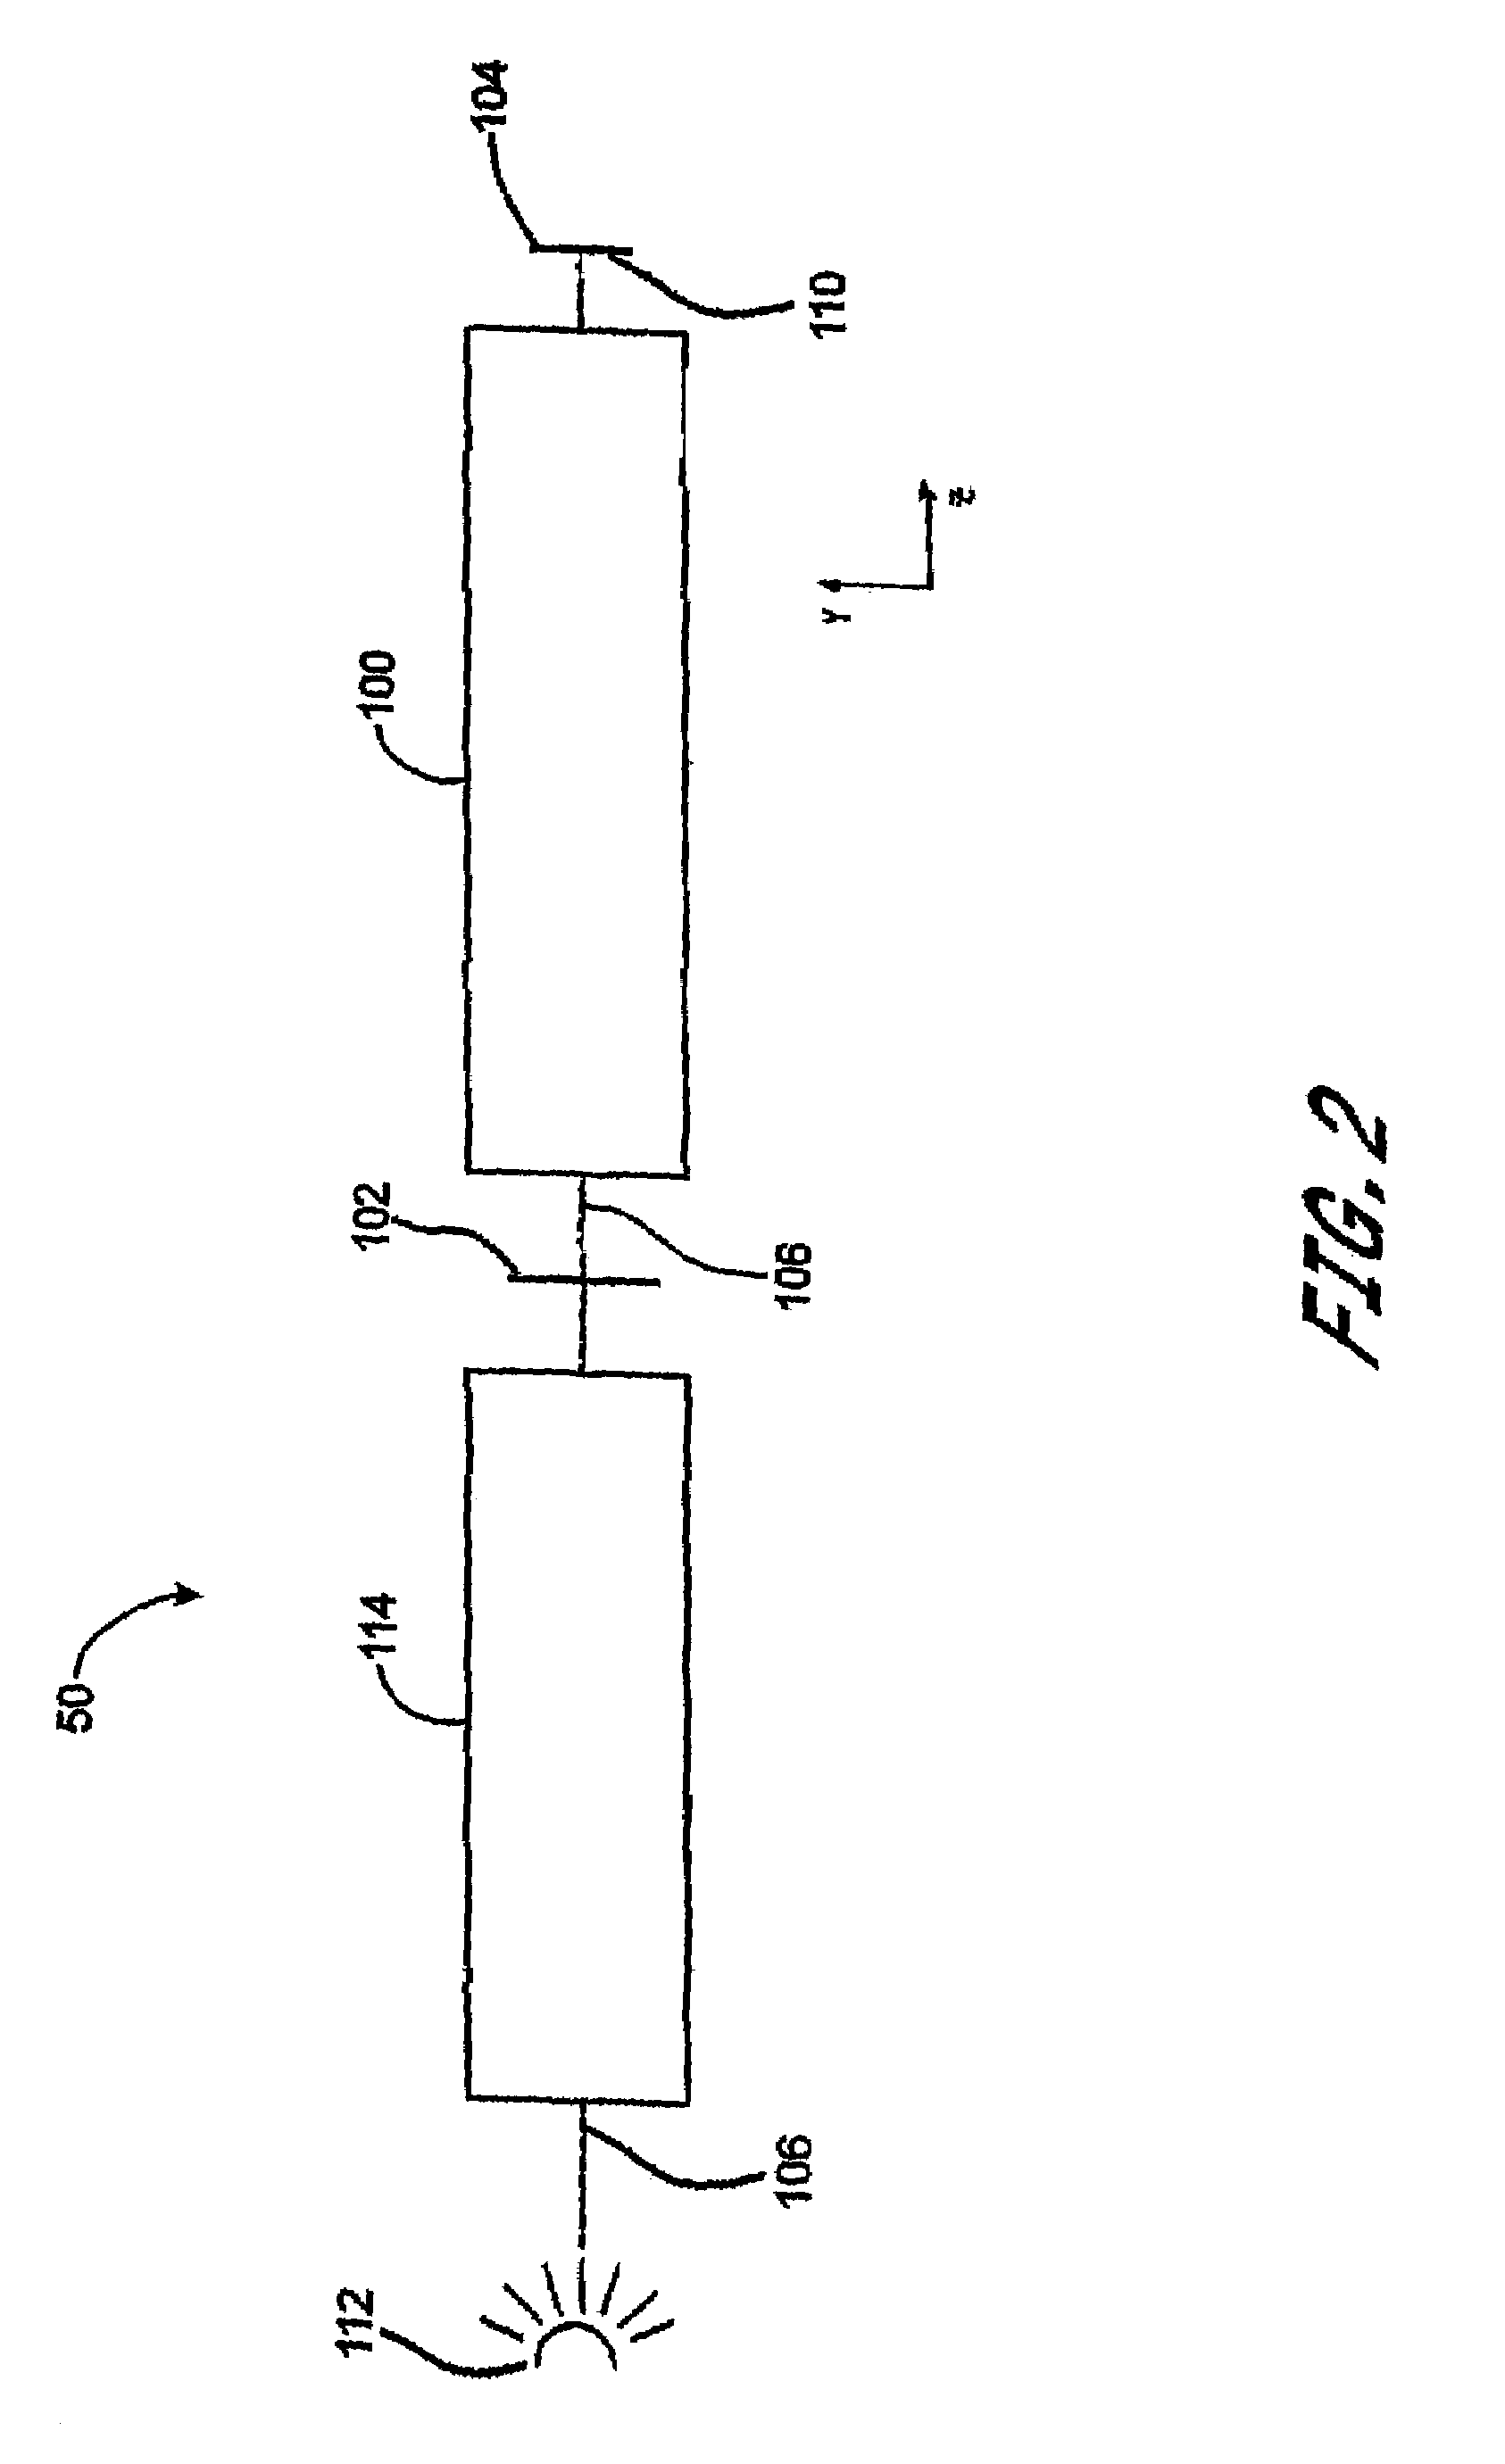 Methods for reducing polarization aberration in optical systems